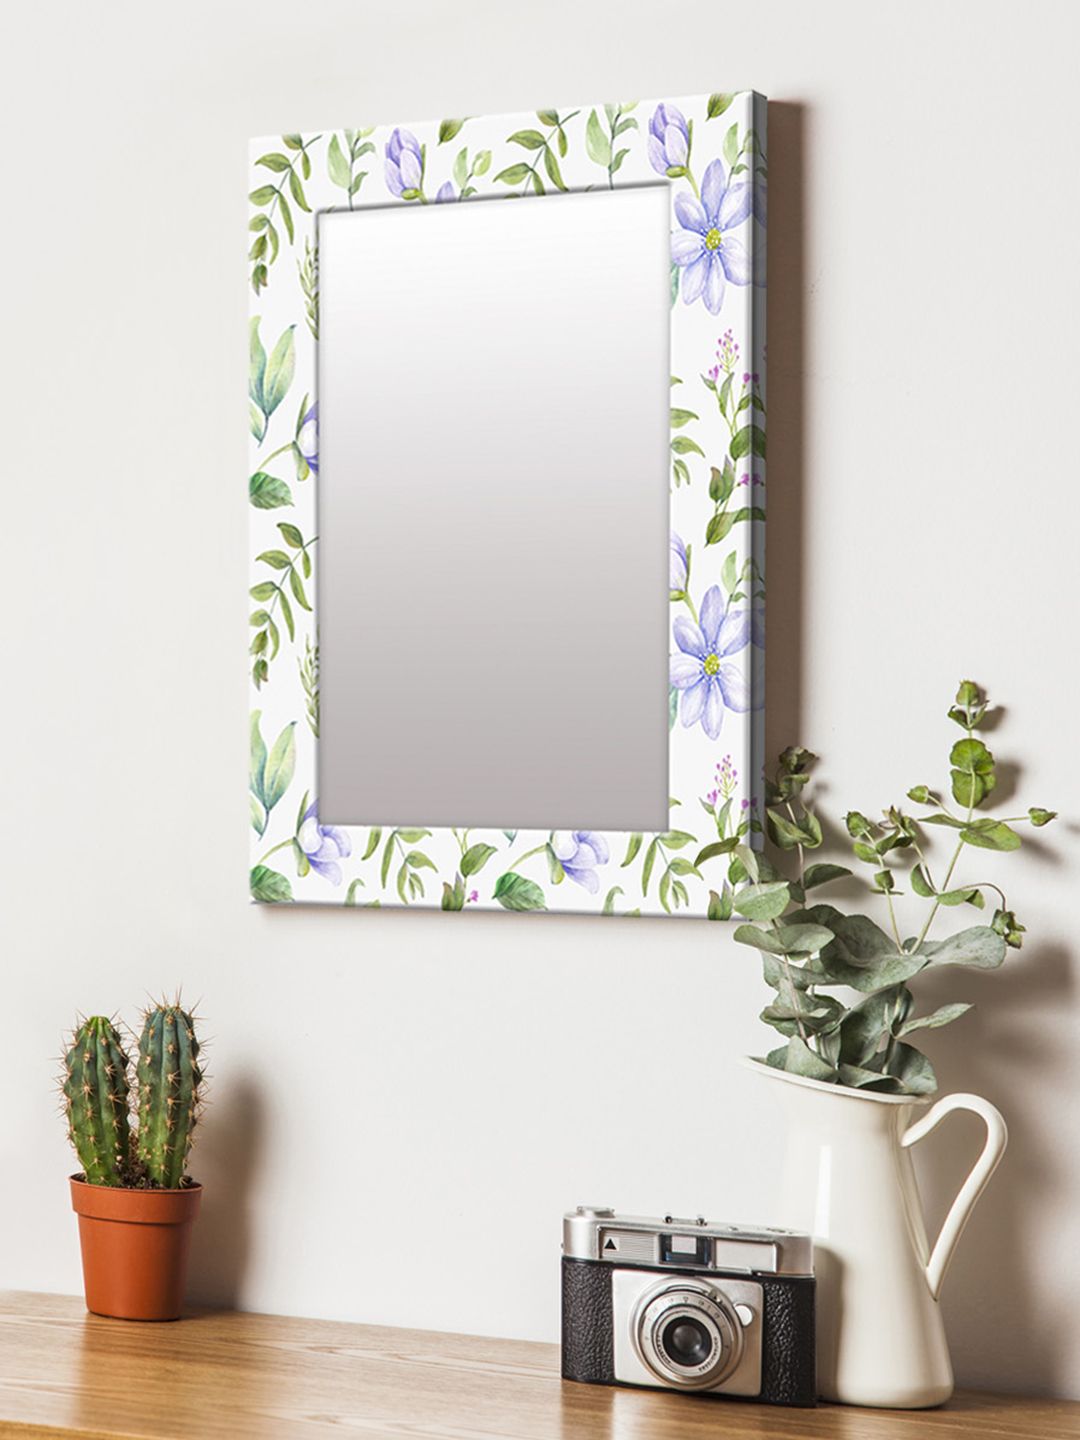 999Store White & Green Printed MDF Wall Mirror Price in India